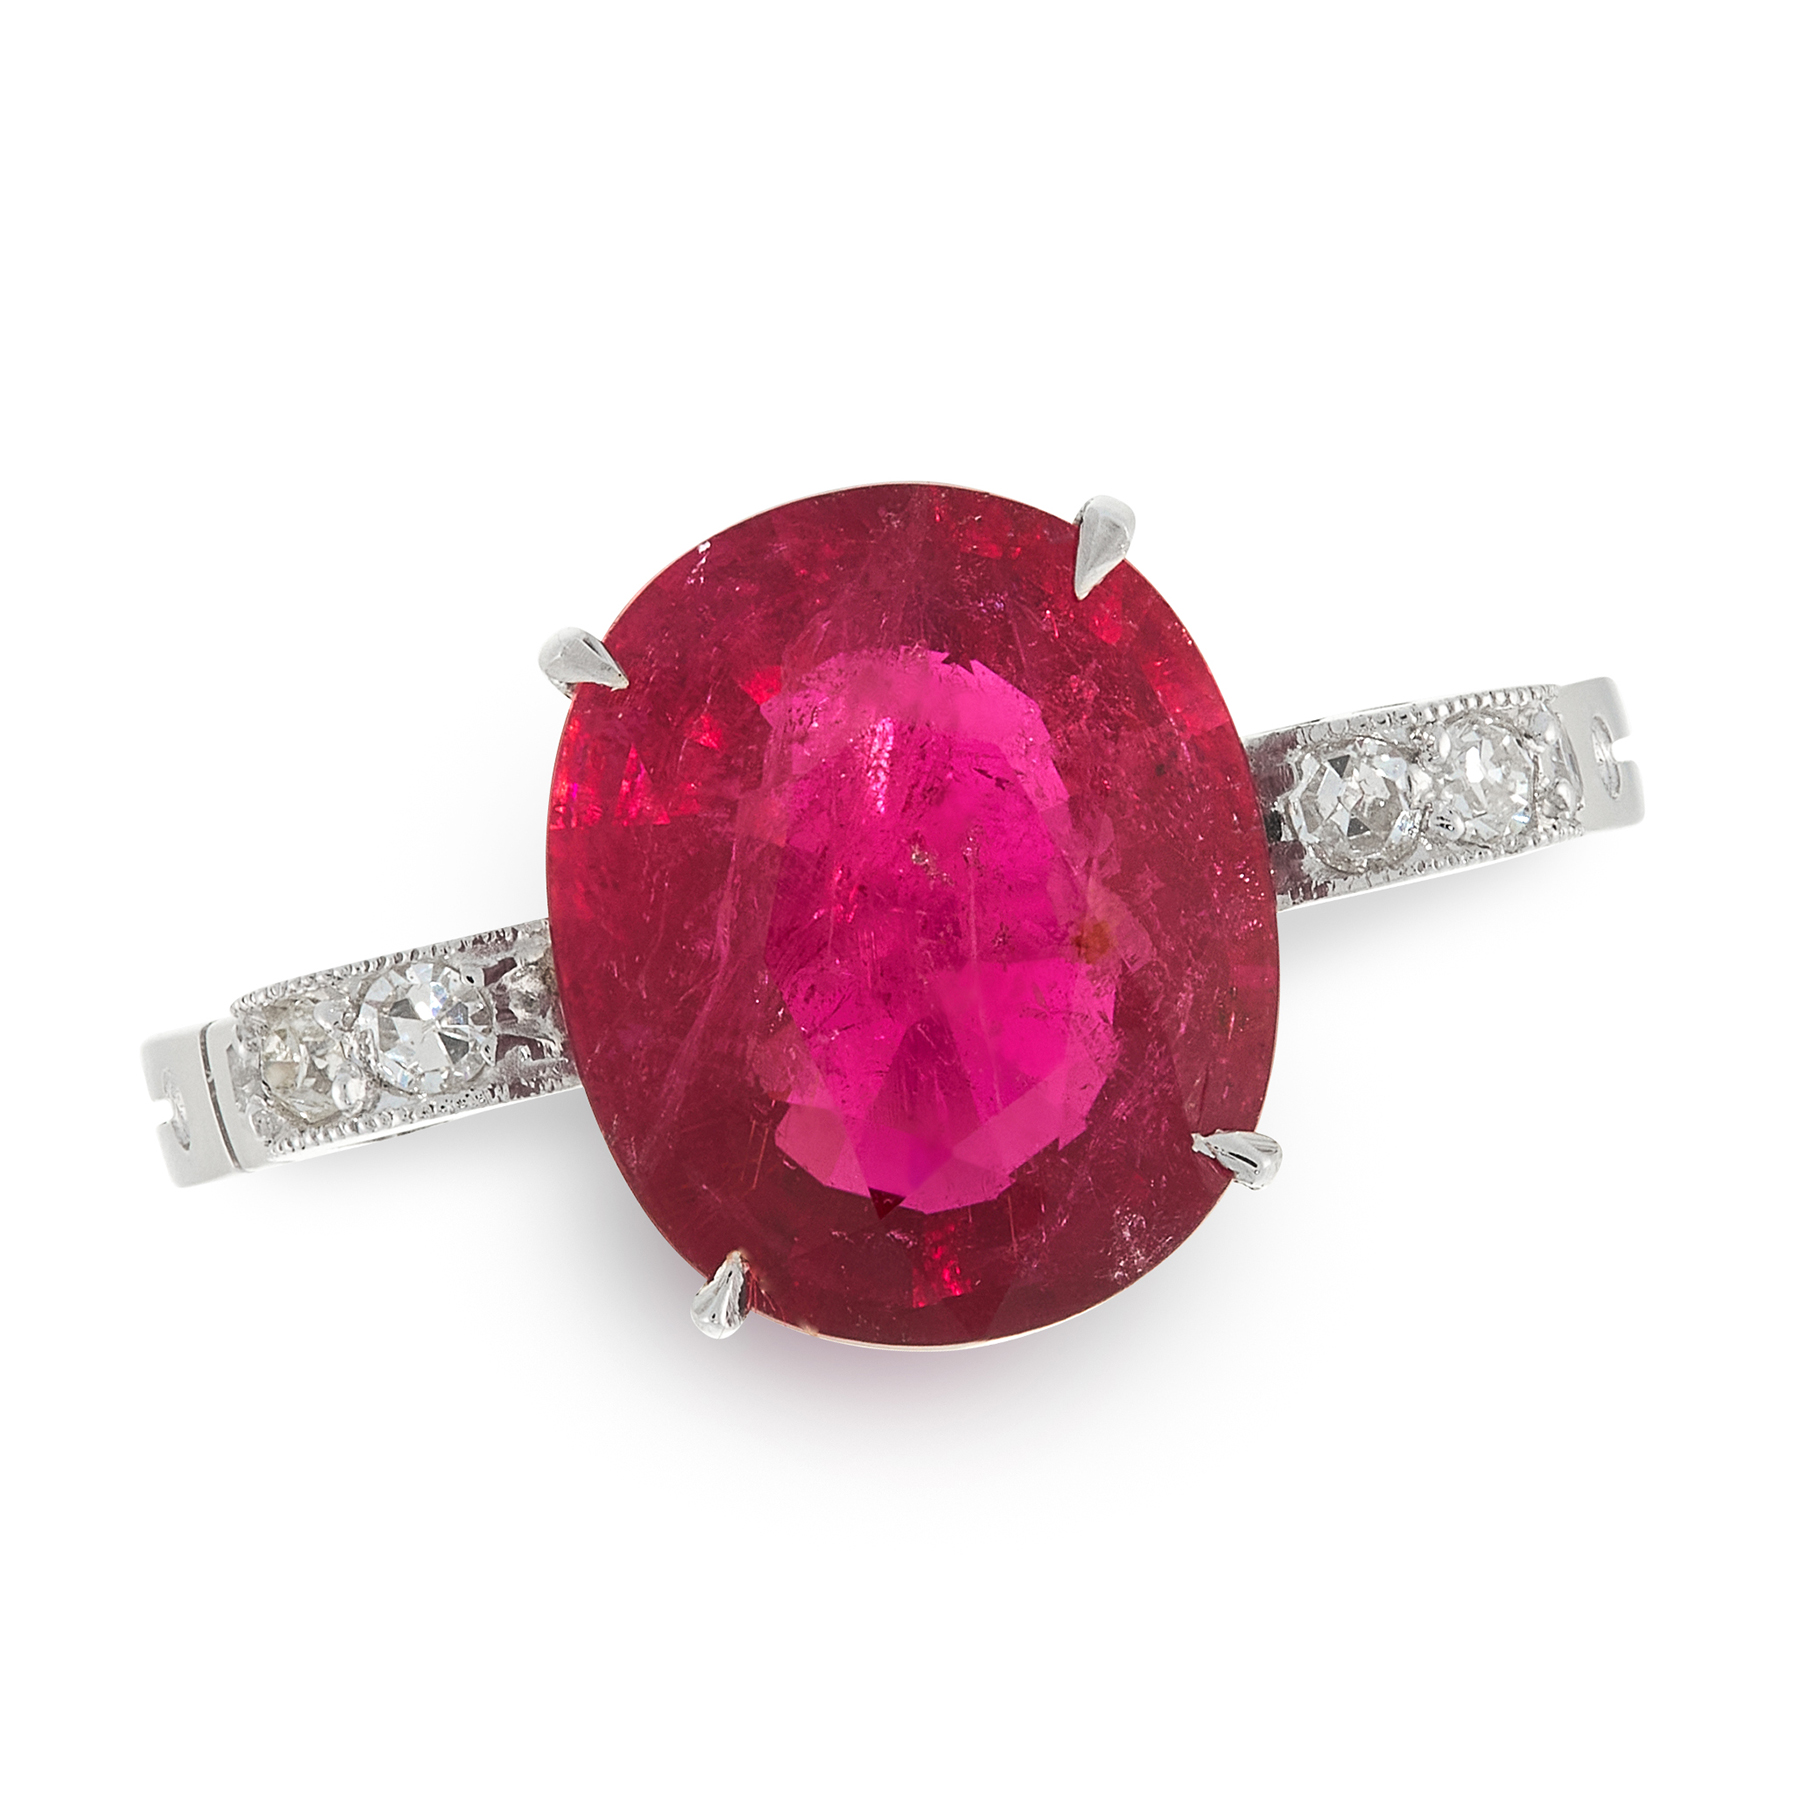 A RUBELLITE TOURMALINE AND DIAMOND DRESS RING set with an oval cut rubellite tourmaline of 3.50